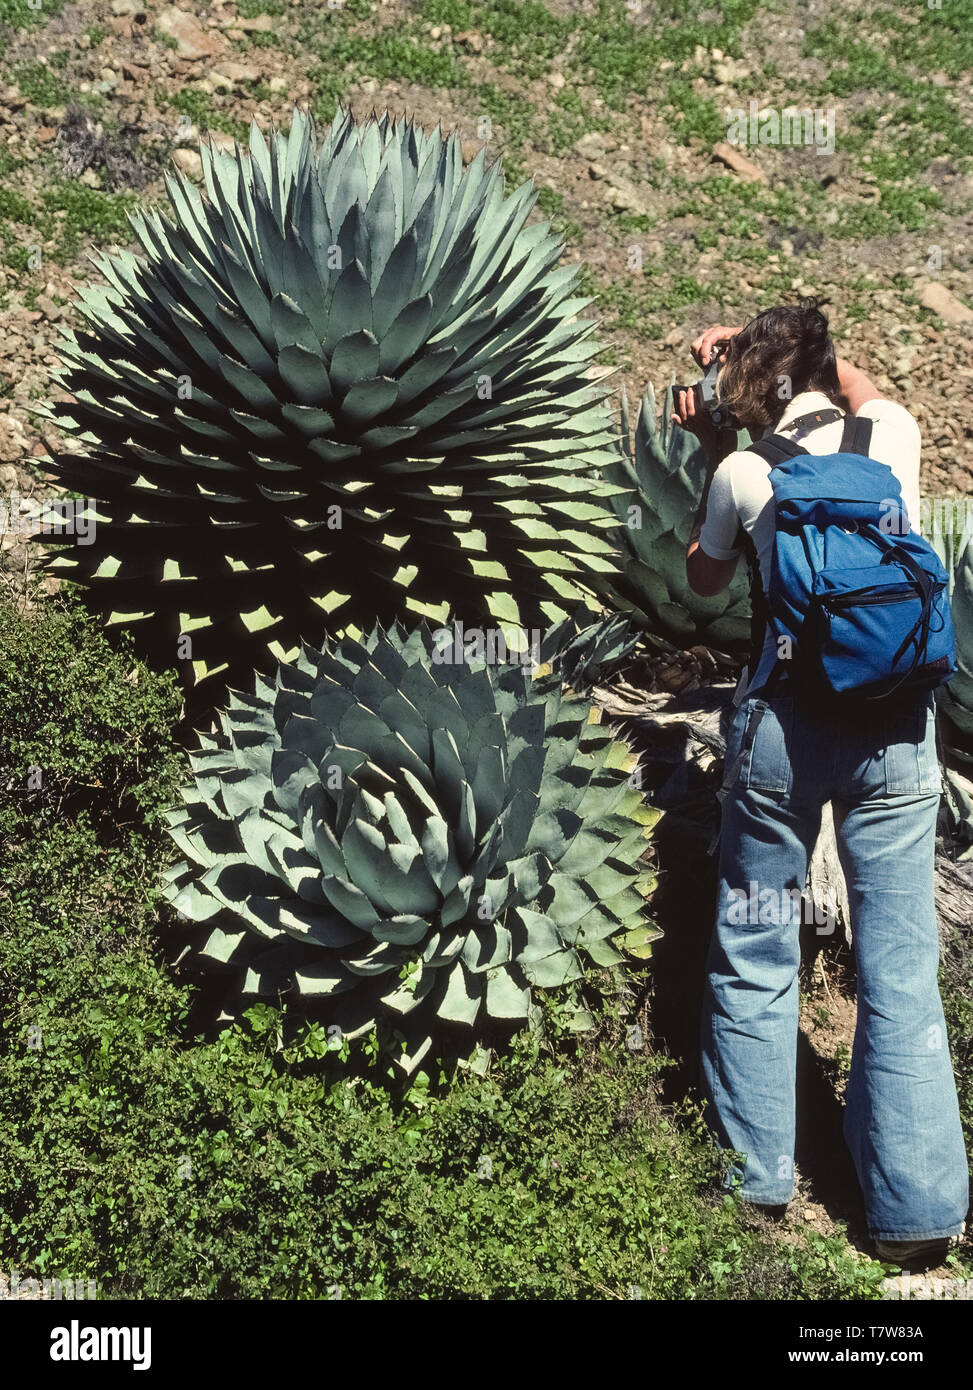 The large fleshy leaves of an Agave sebastiana (Silver Lining) plant are being photographed close up by a woman visitor to Cedros Island in the Pacific Ocean on the west coast of Baja California in Mexico, North America. Also known as the Cedros Island agave, this succulent grows in a rosette pattern that can be as wide and as tall as 3 to 5 feet (.91-1.5 meters). There are nearly 200 species of agave plants, including one used to make tequila, the popular Mexican liquor. Agaves are sometimes confused with cactuses, which come from a different plant family. Stock Photo